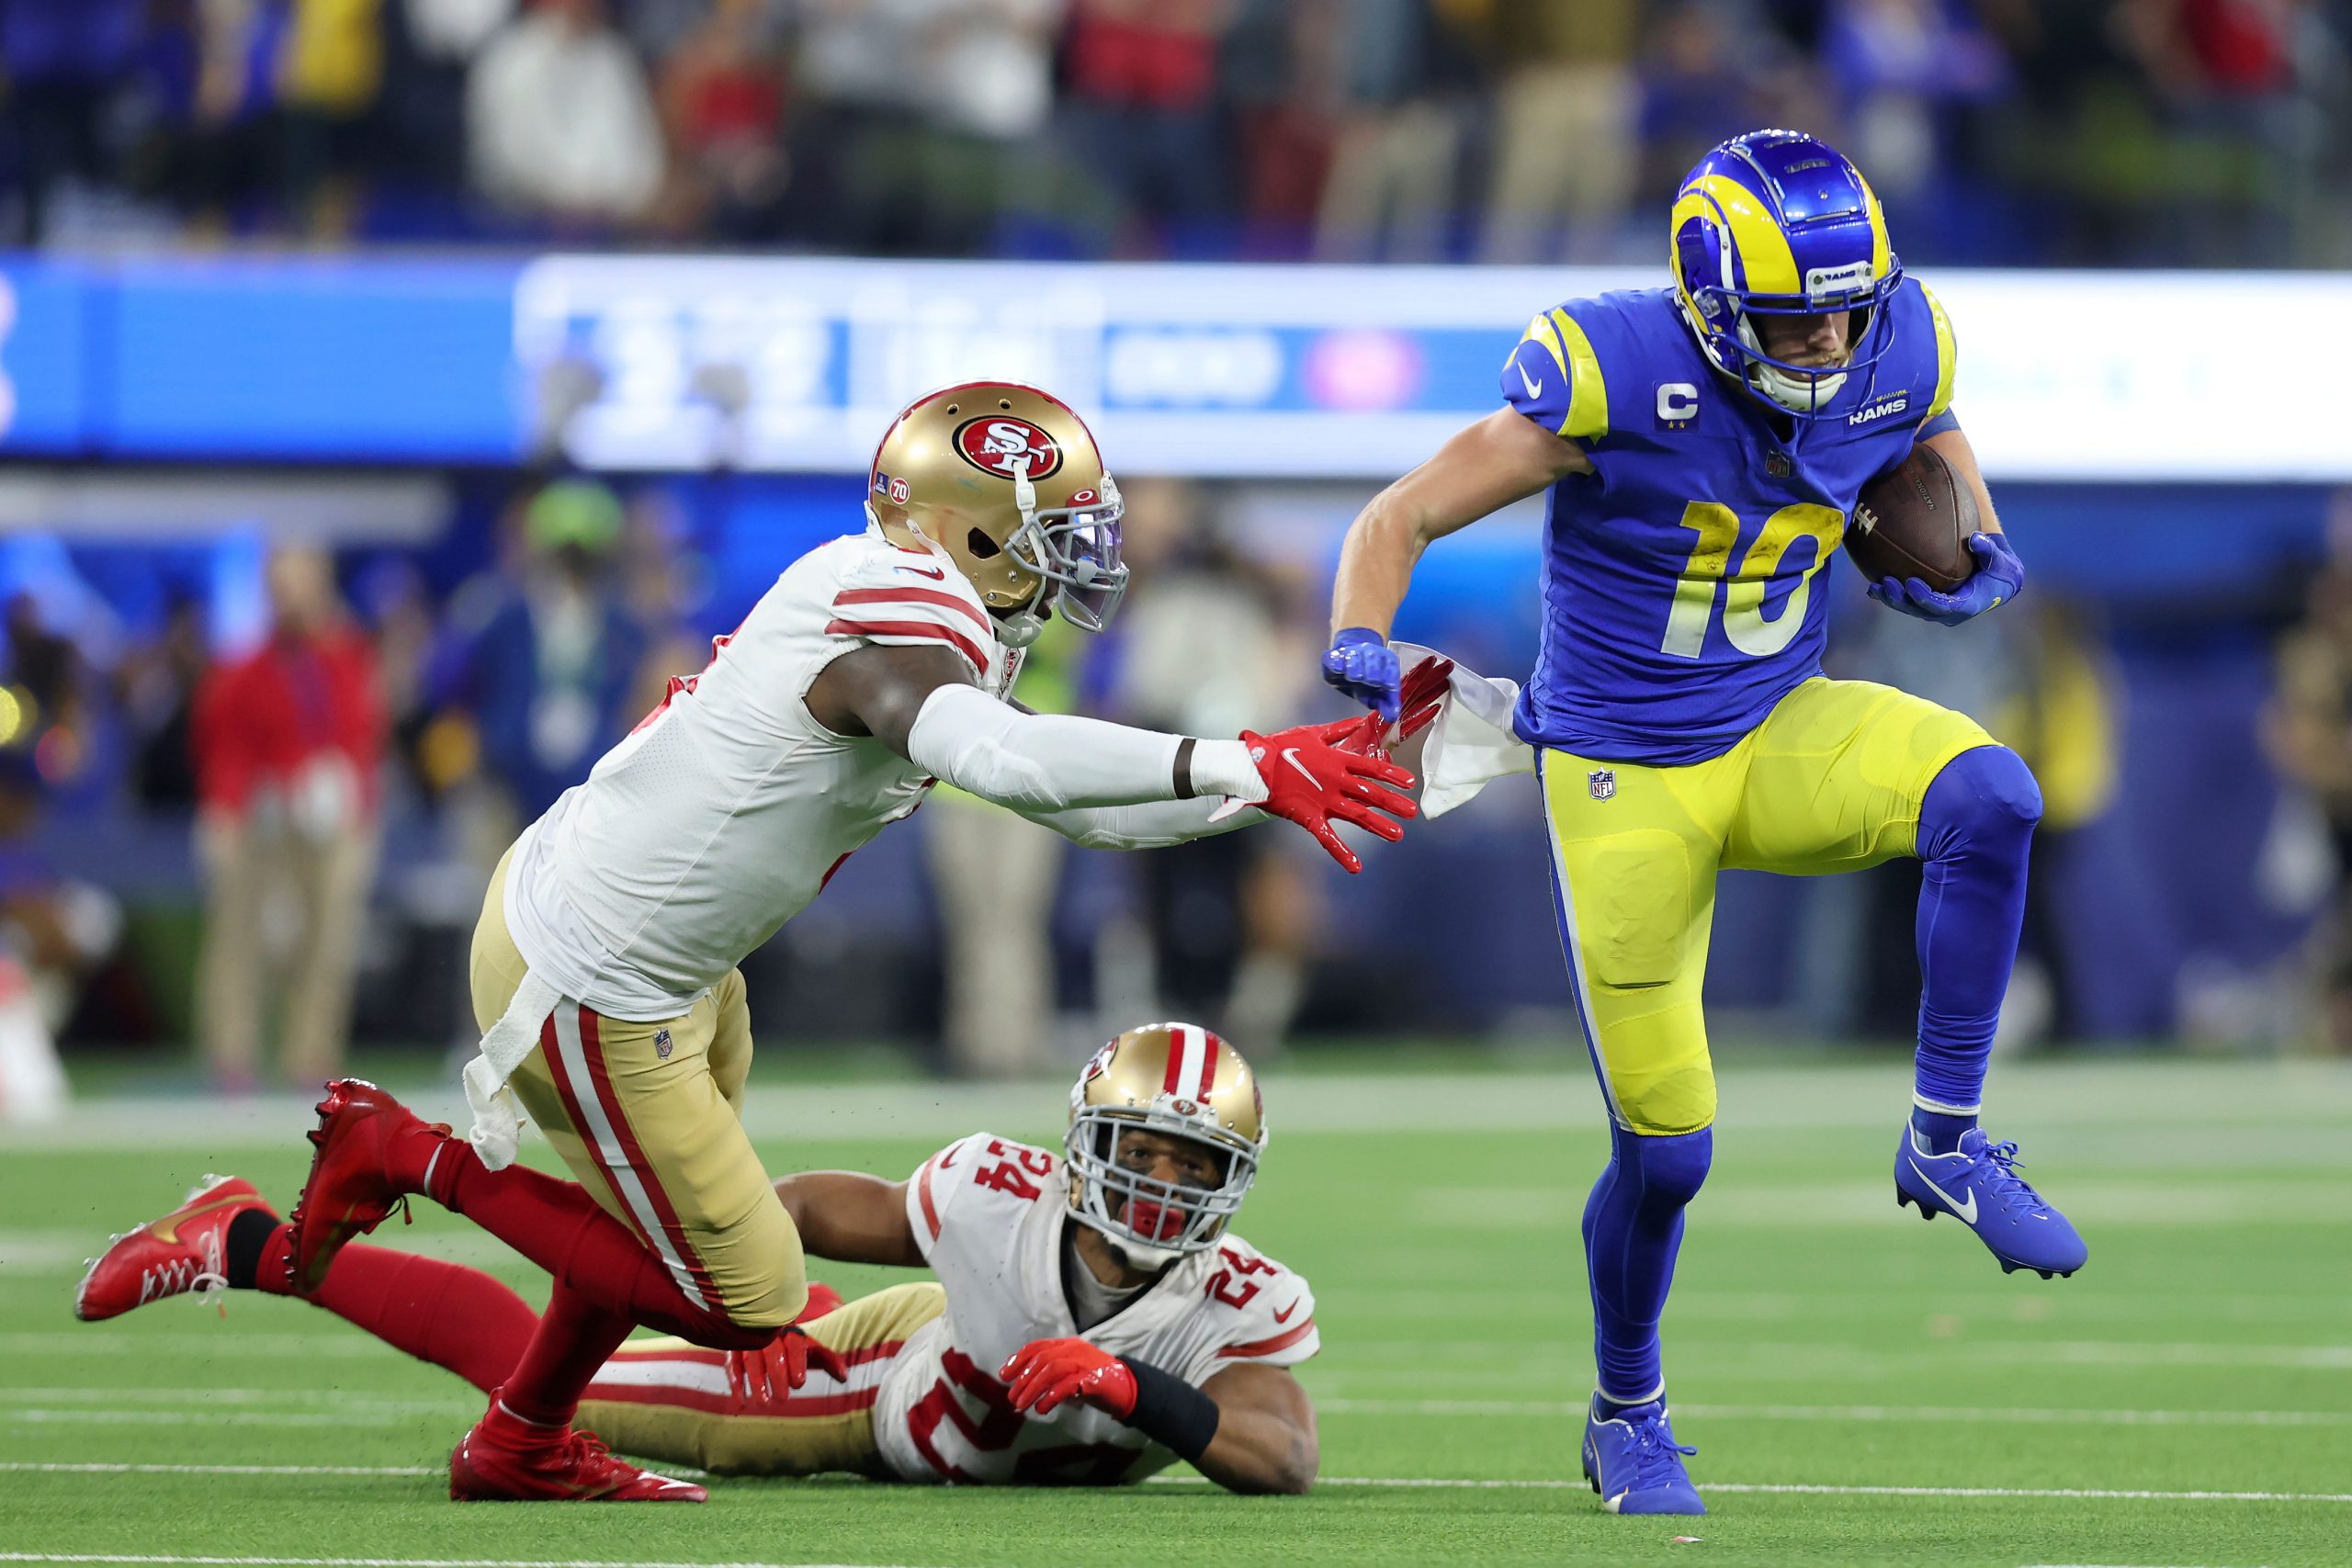 NFL: Los Angeles Rams rally to Super Bowl with stunning 20-17 win over San Francisco 49ers